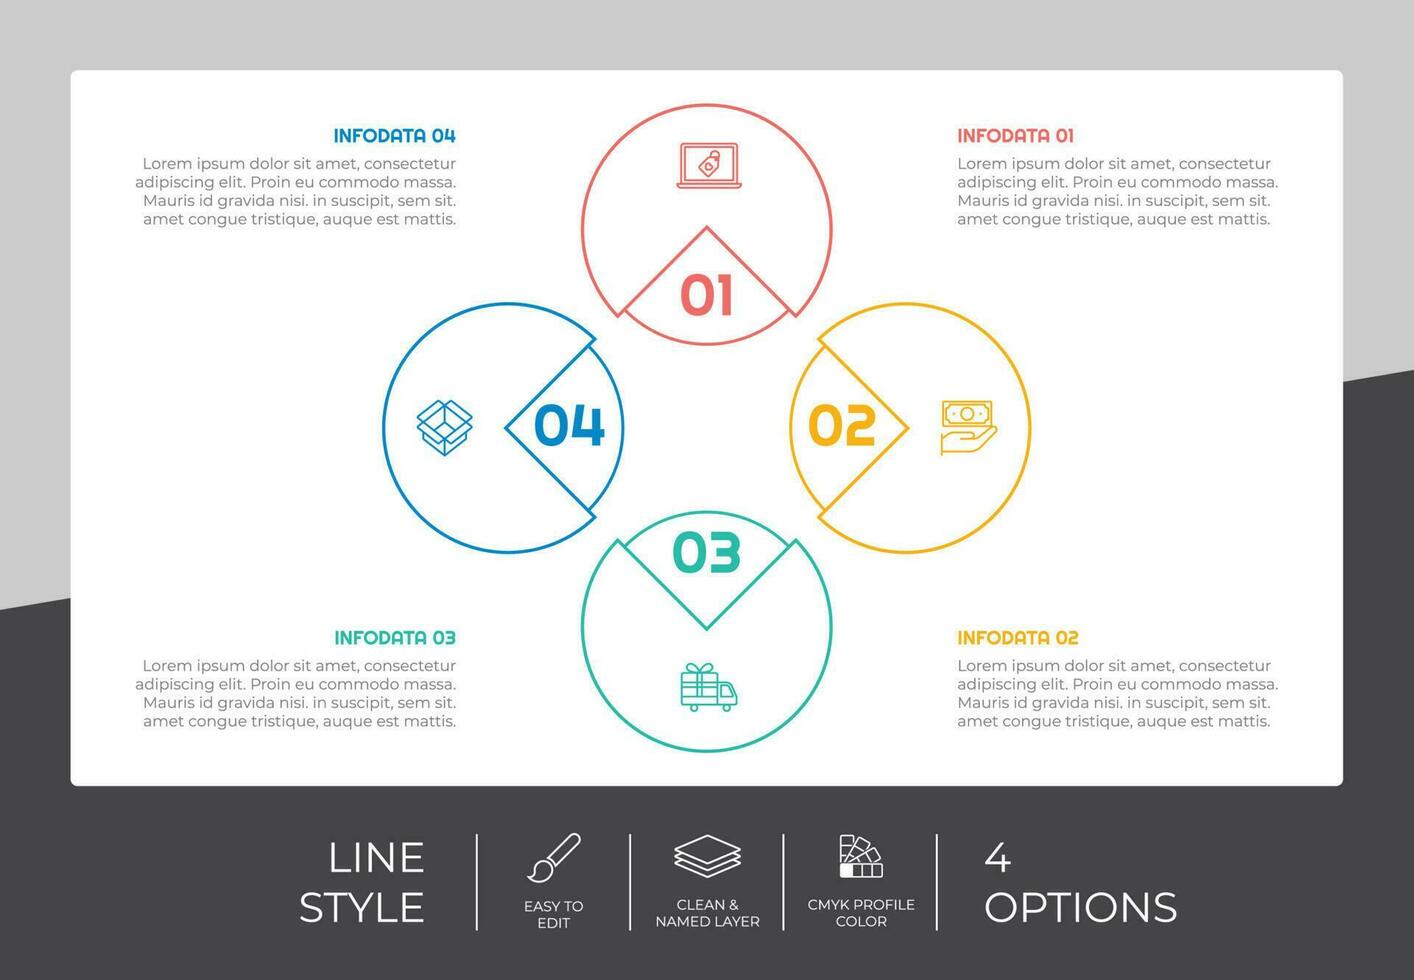 Circle option infographic vector design with 4 options colorful style for presentation purpose.Line option infographic can be used for business and marketing